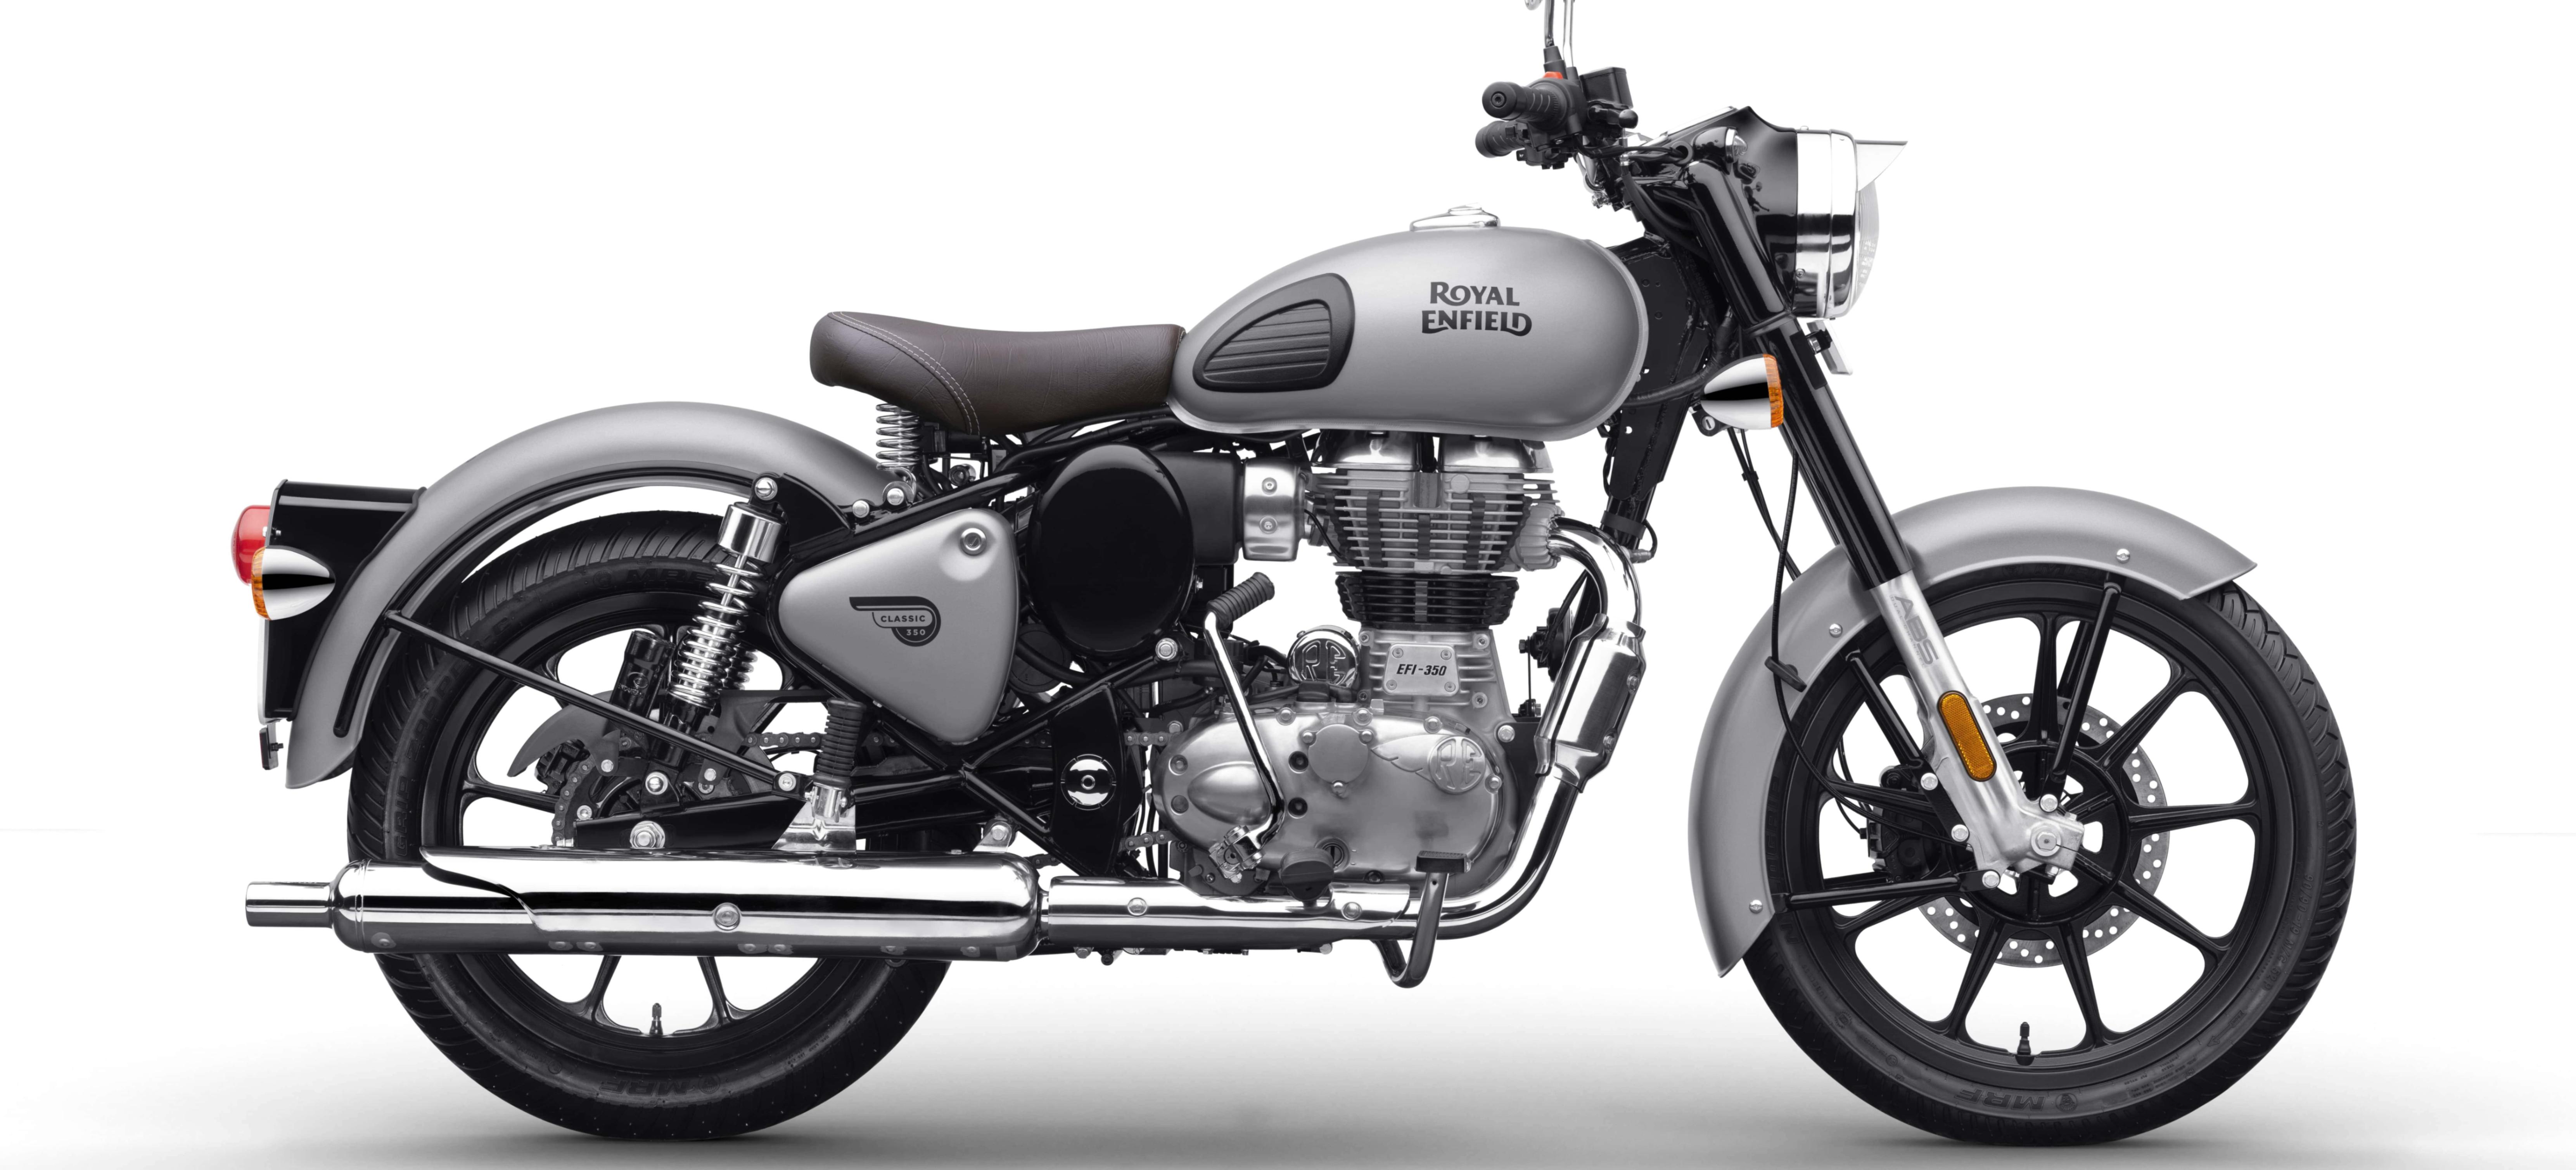 Rent a Royal Enfield, Motorcycle Rentals